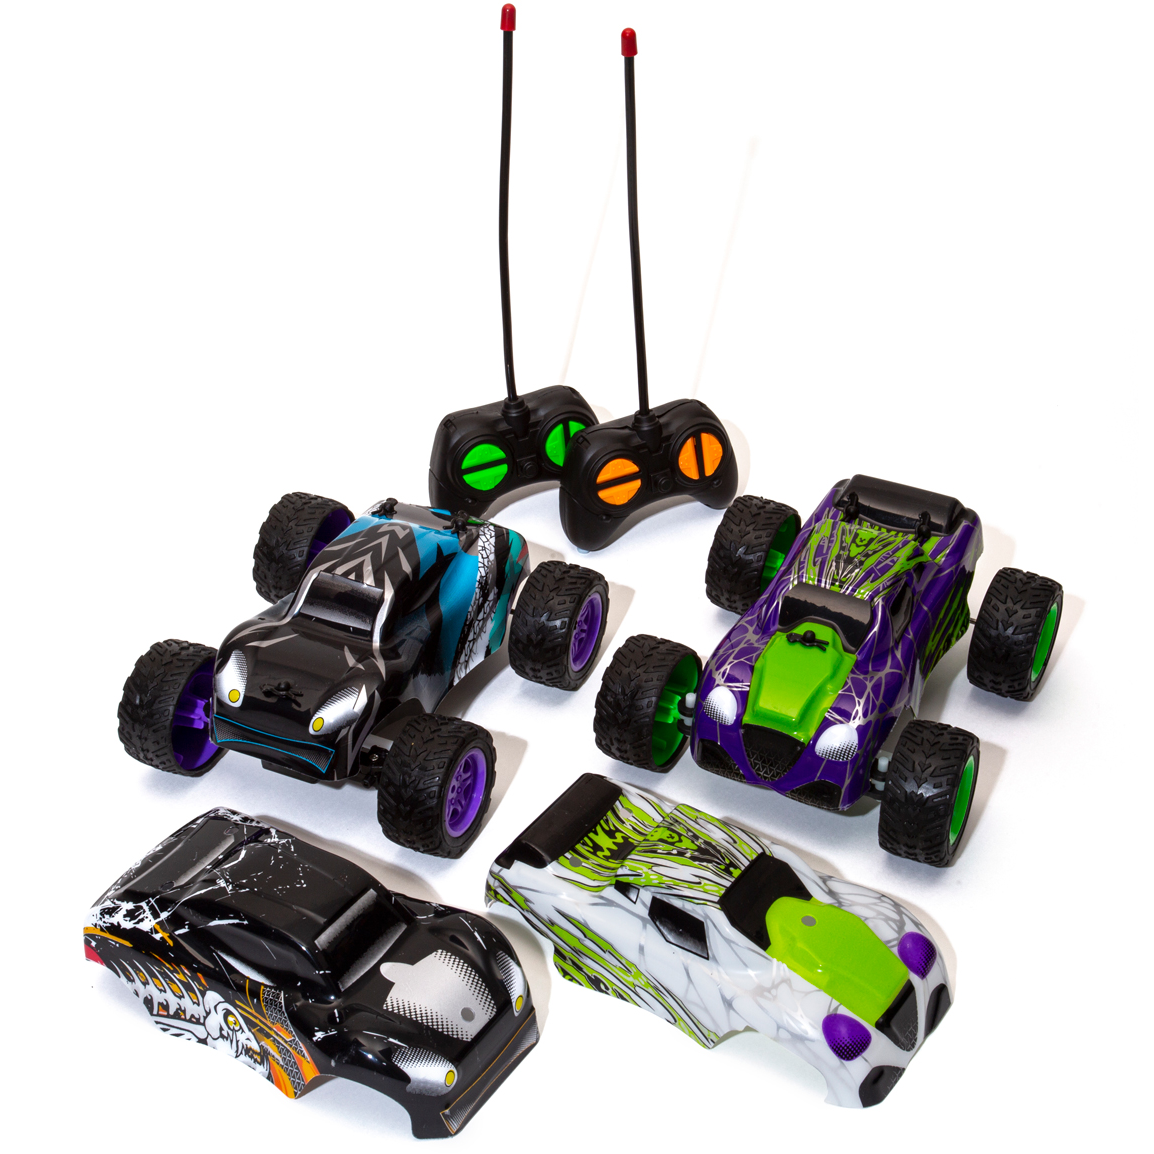 Xtreme Racers Remote Control Cars Featuring high torque engine and 360-degree turns Zoom Xtreme Turns Remotes Remote-Controlled remote control Remote races racers Racer race kids kid Insane gift Degrees Degree Dash controlled control christmas day christmas childs childrens Children child Cars car